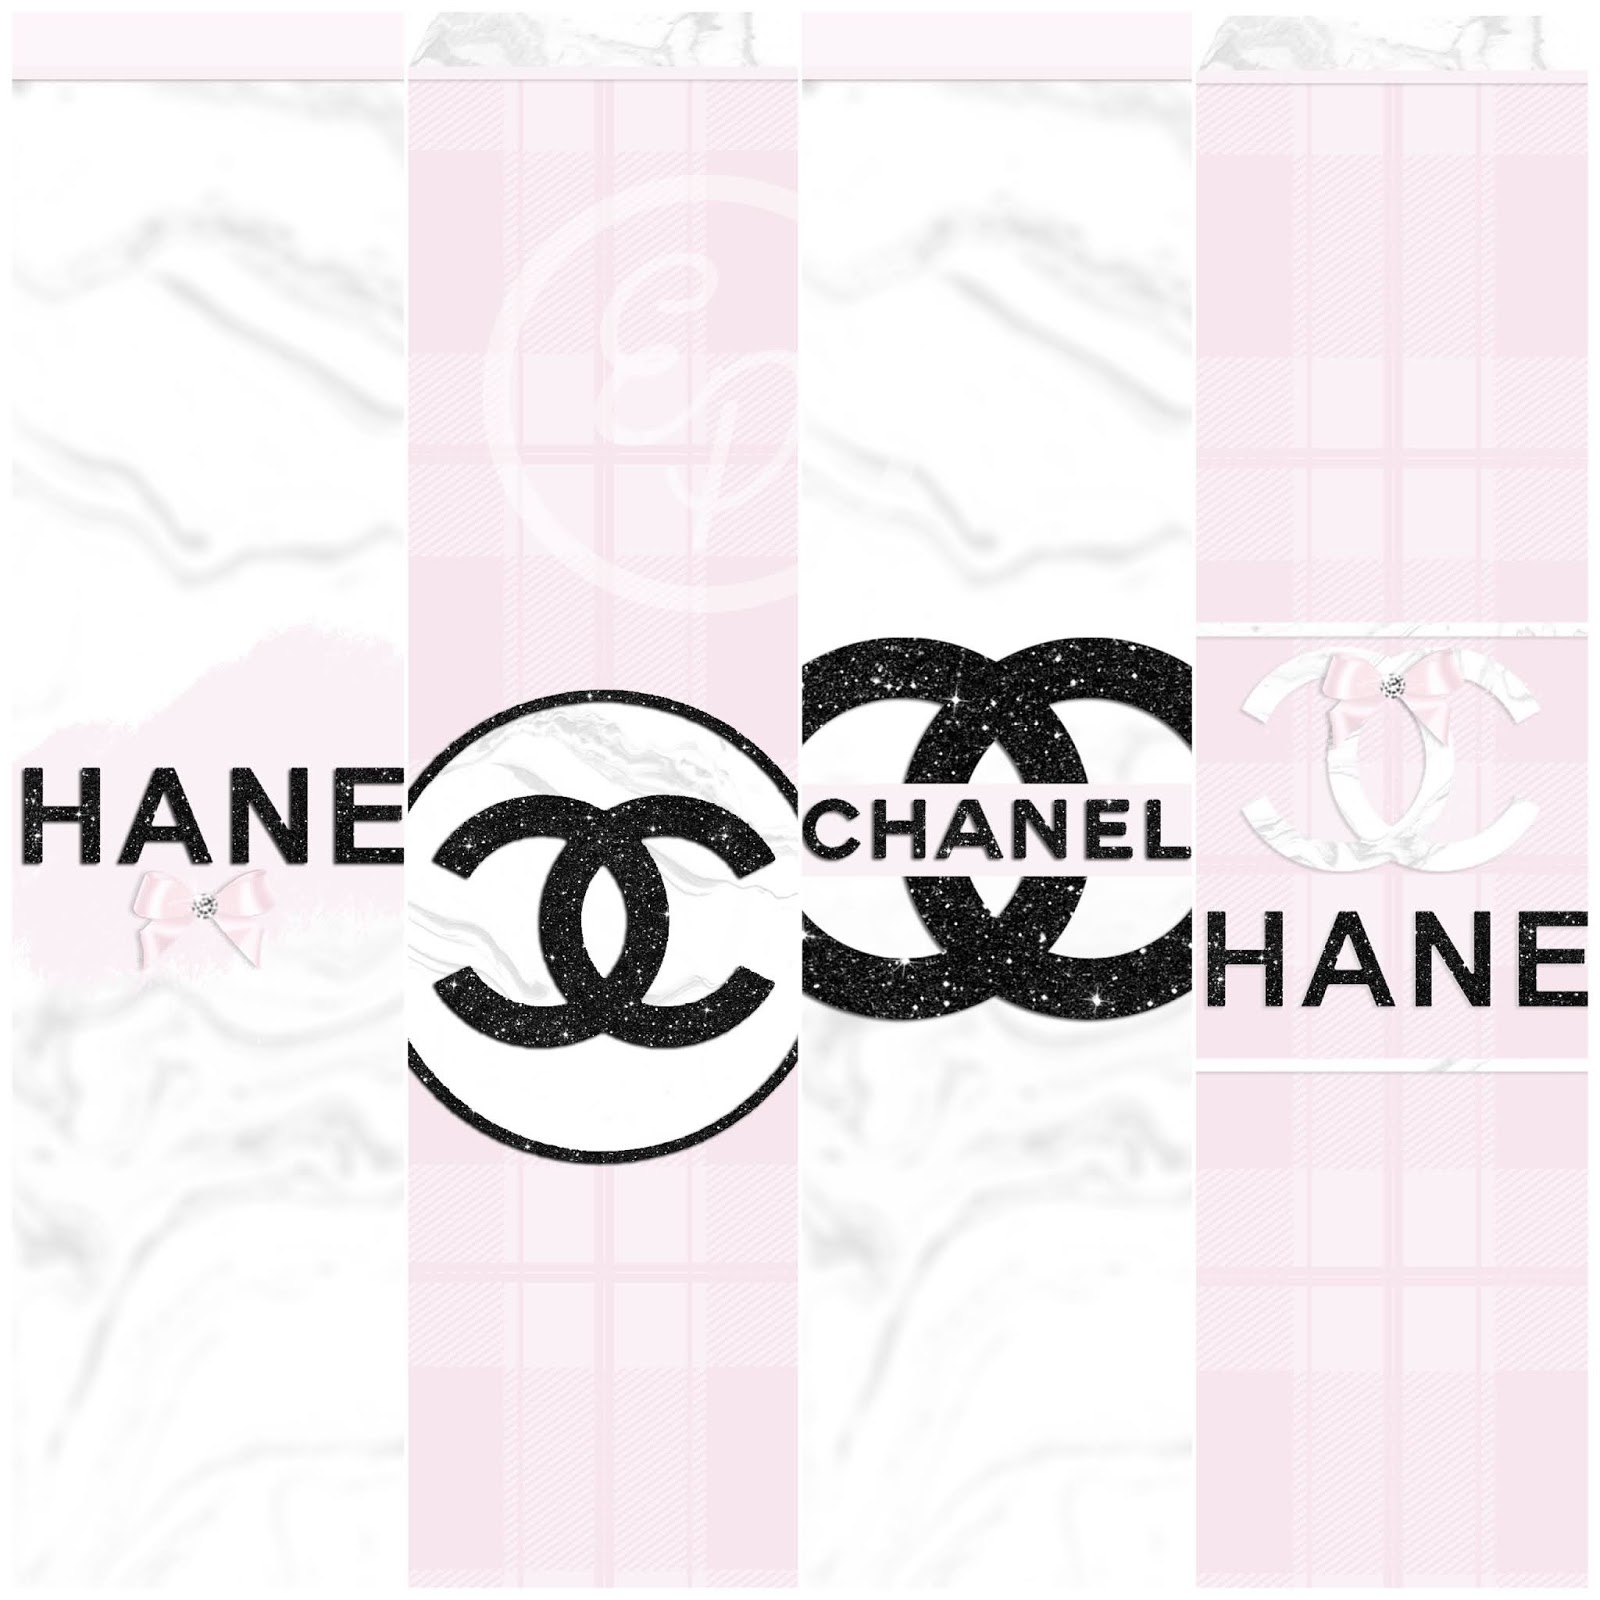 Pretty Walls: Chanel and marble 8 piece wallpaper set